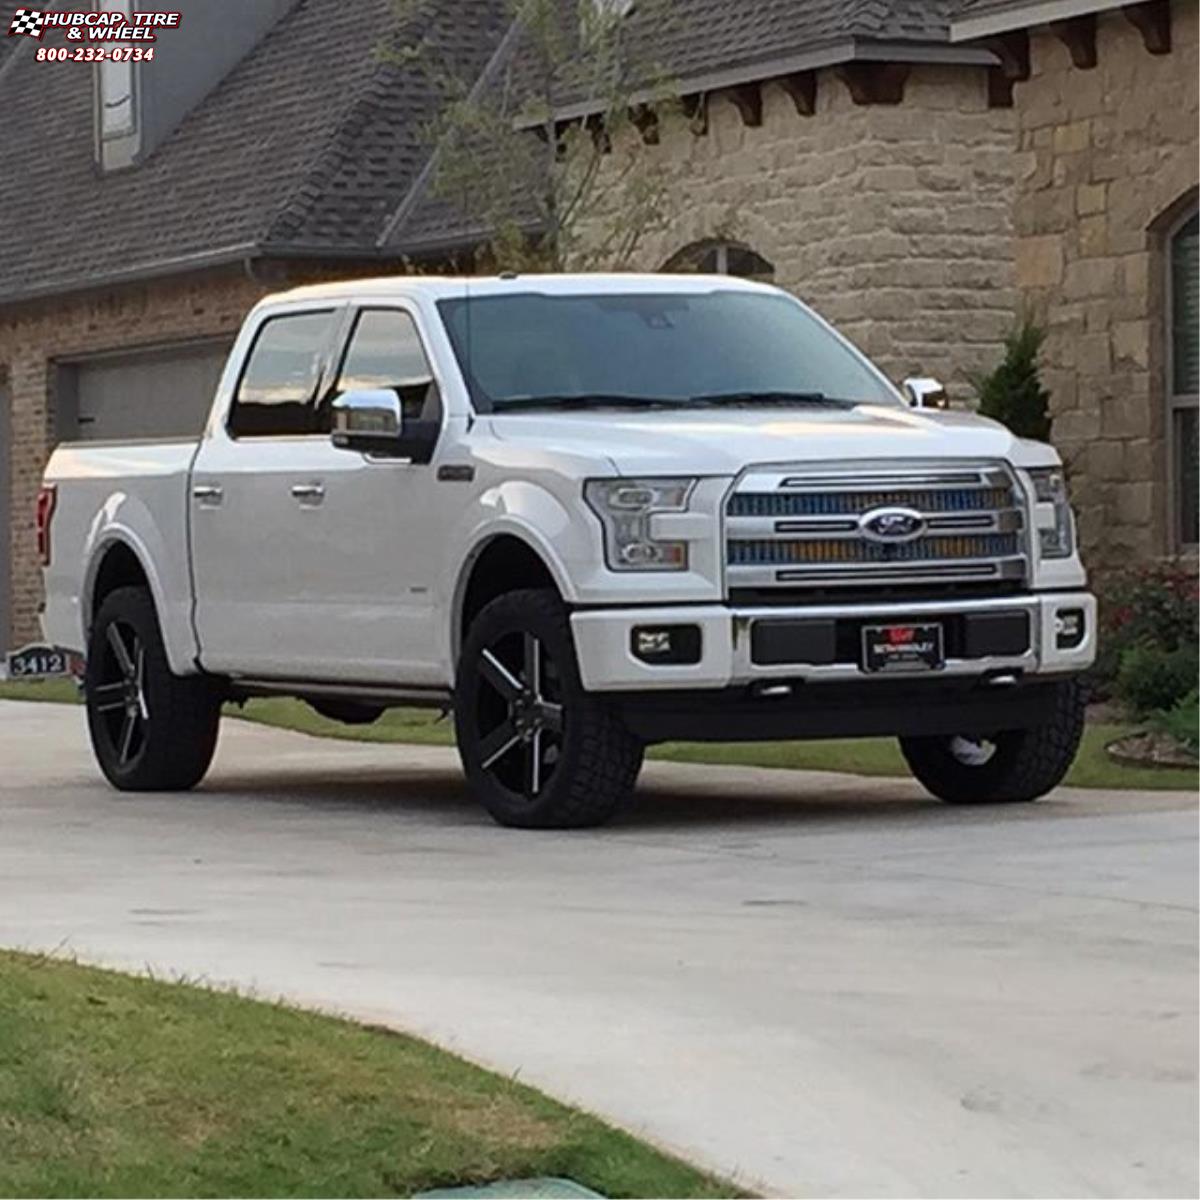 vehicle gallery/ford f 150 xd series km690 mc 5  Satin Black Milled wheels and rims